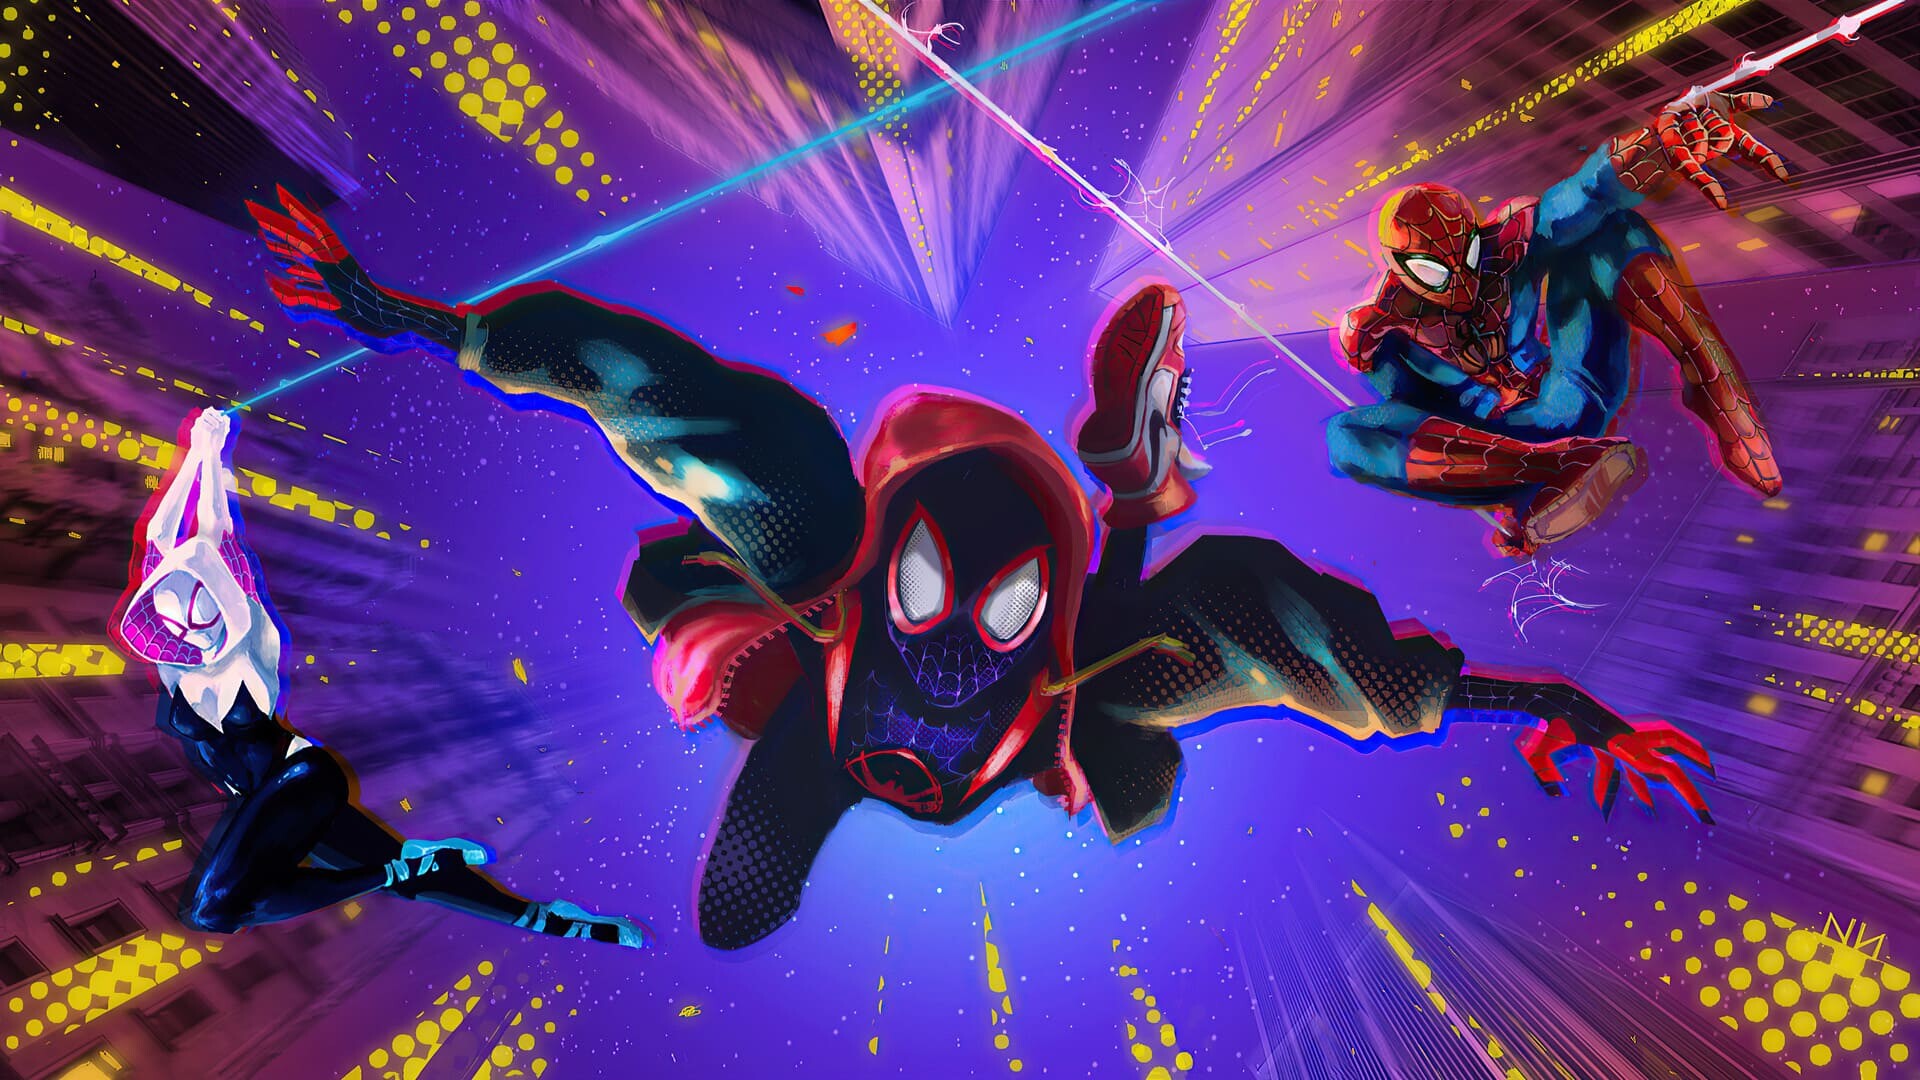 Spider-Man: Into the Spider-Verse: Miles Morales, Peter B. Parker, Gwen Stacy. 1920x1080 Full HD Background.